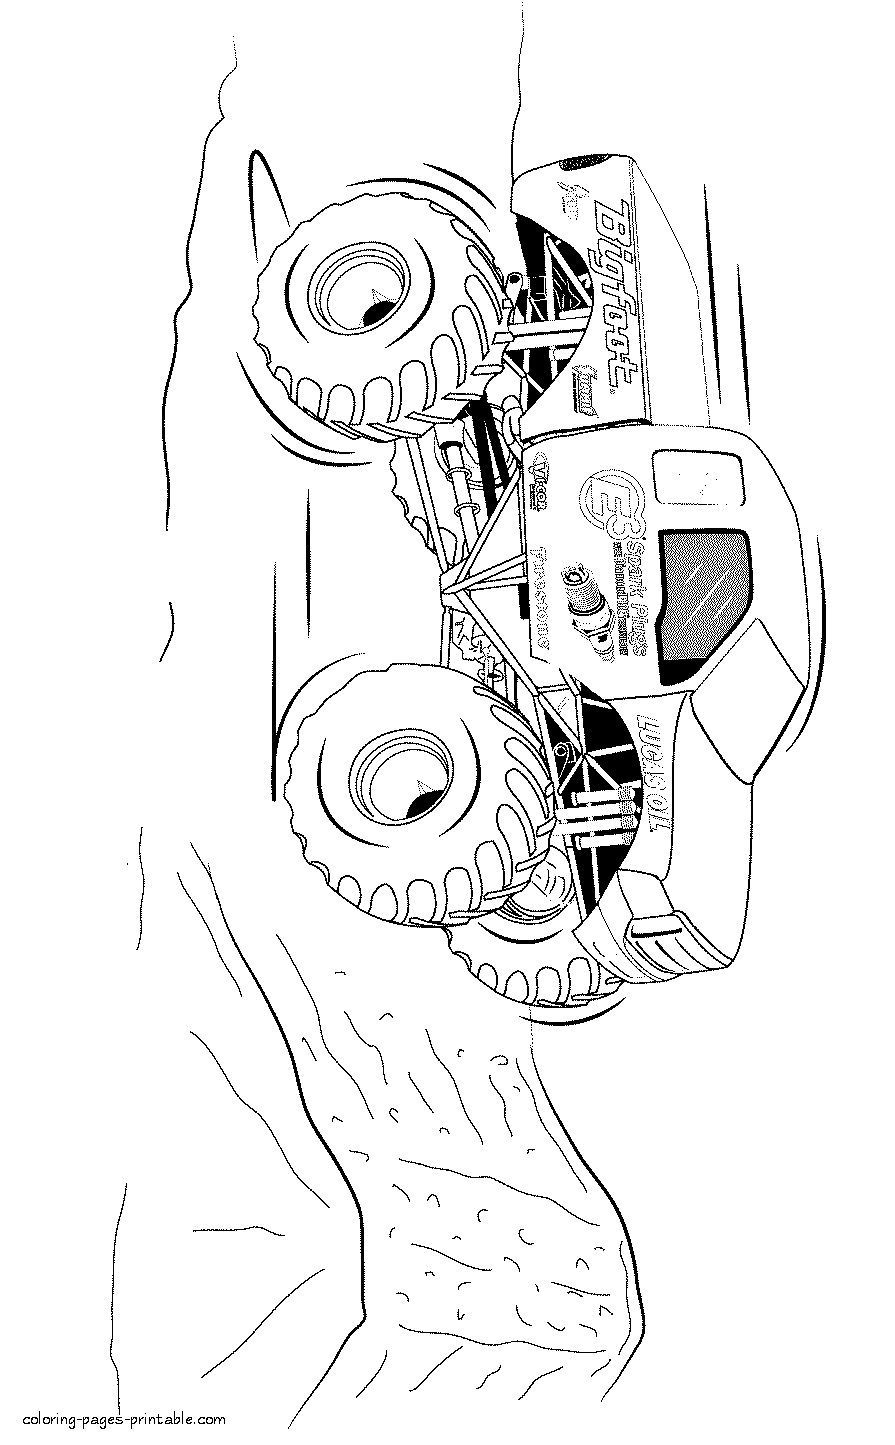 Monster truck coloring pages to print. Easy, fast and free